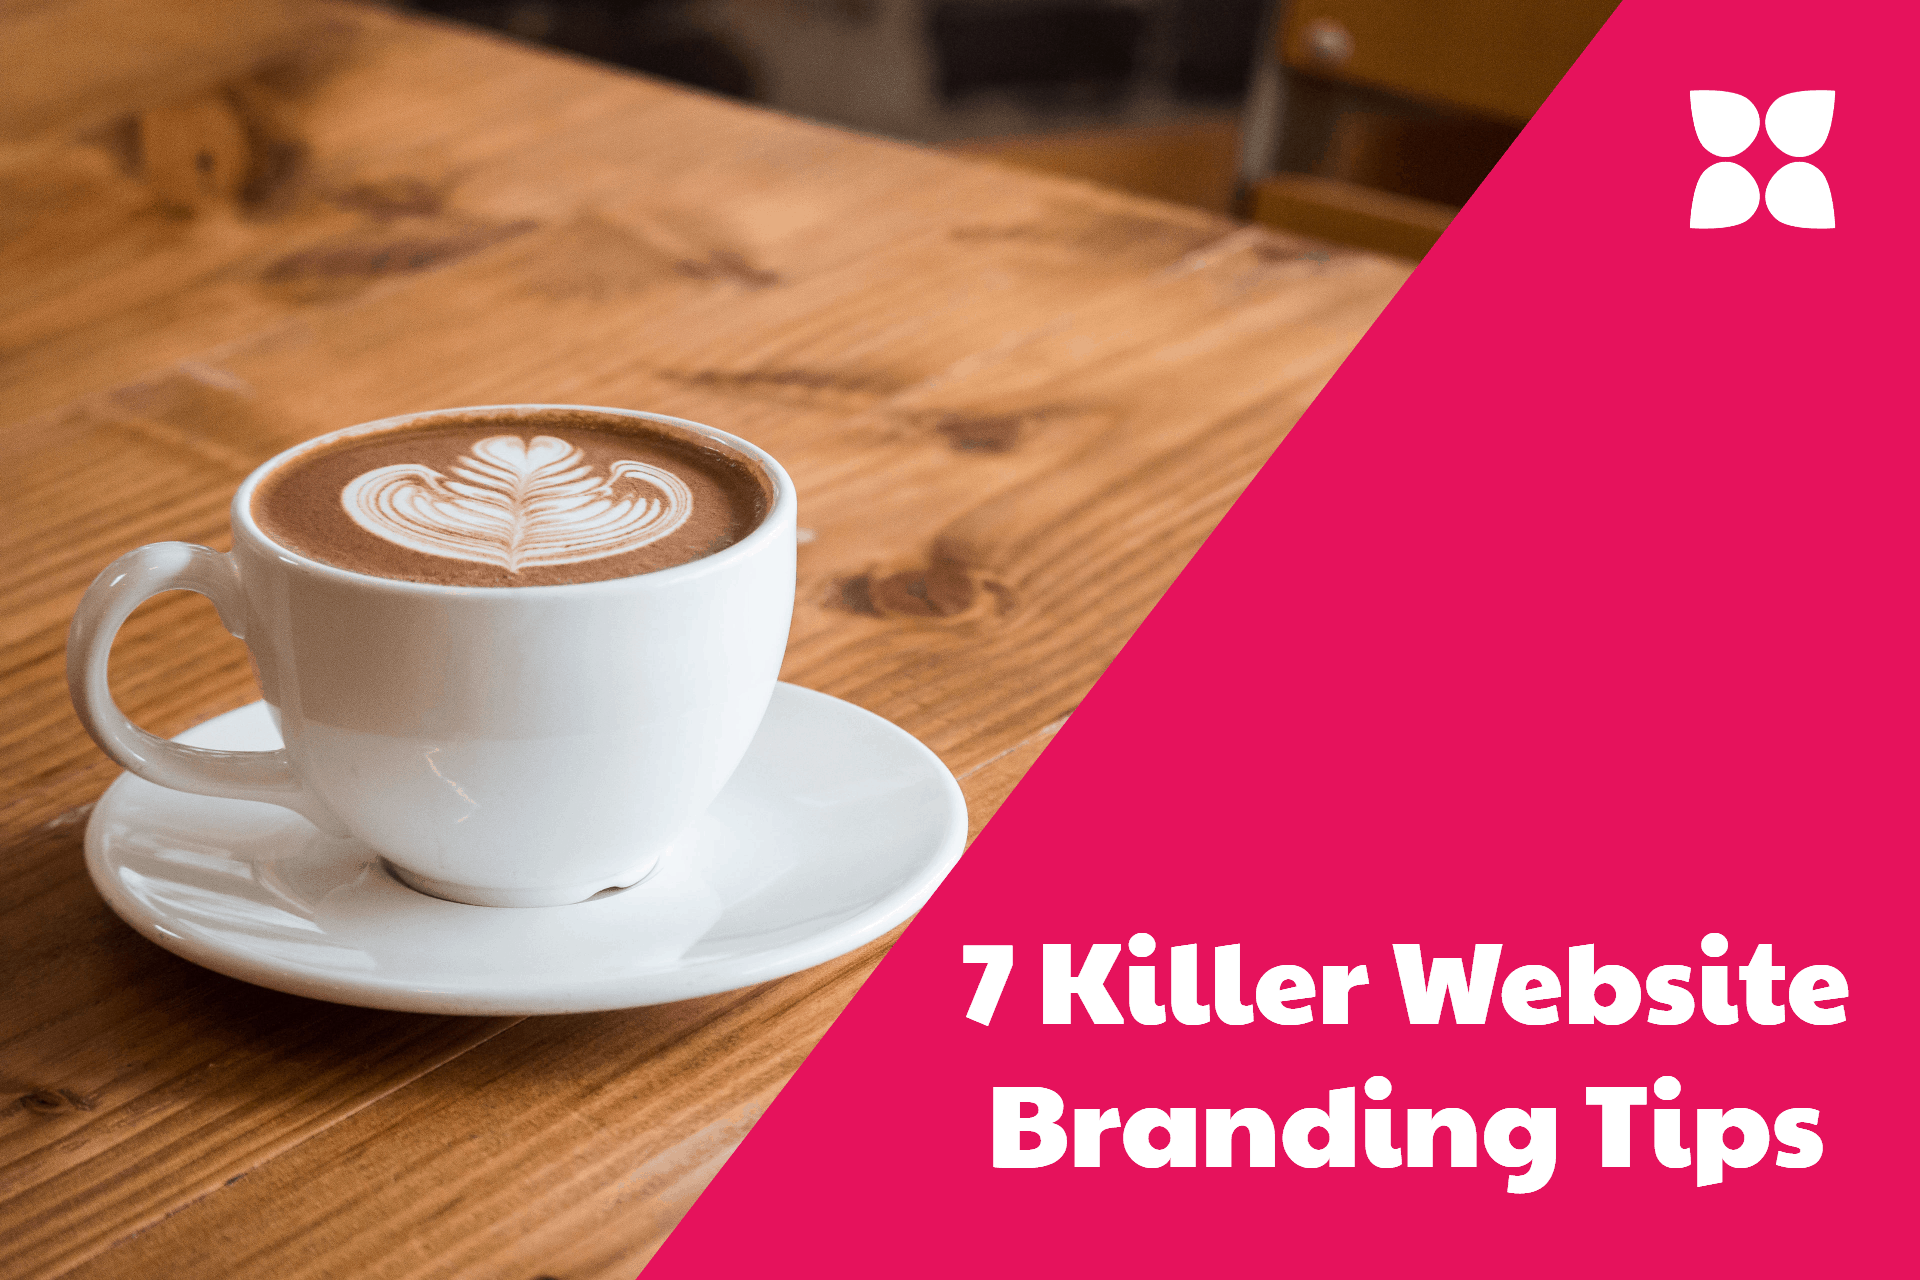 7 Killer Website Branding Tips For New Bloggers And Small Businesses